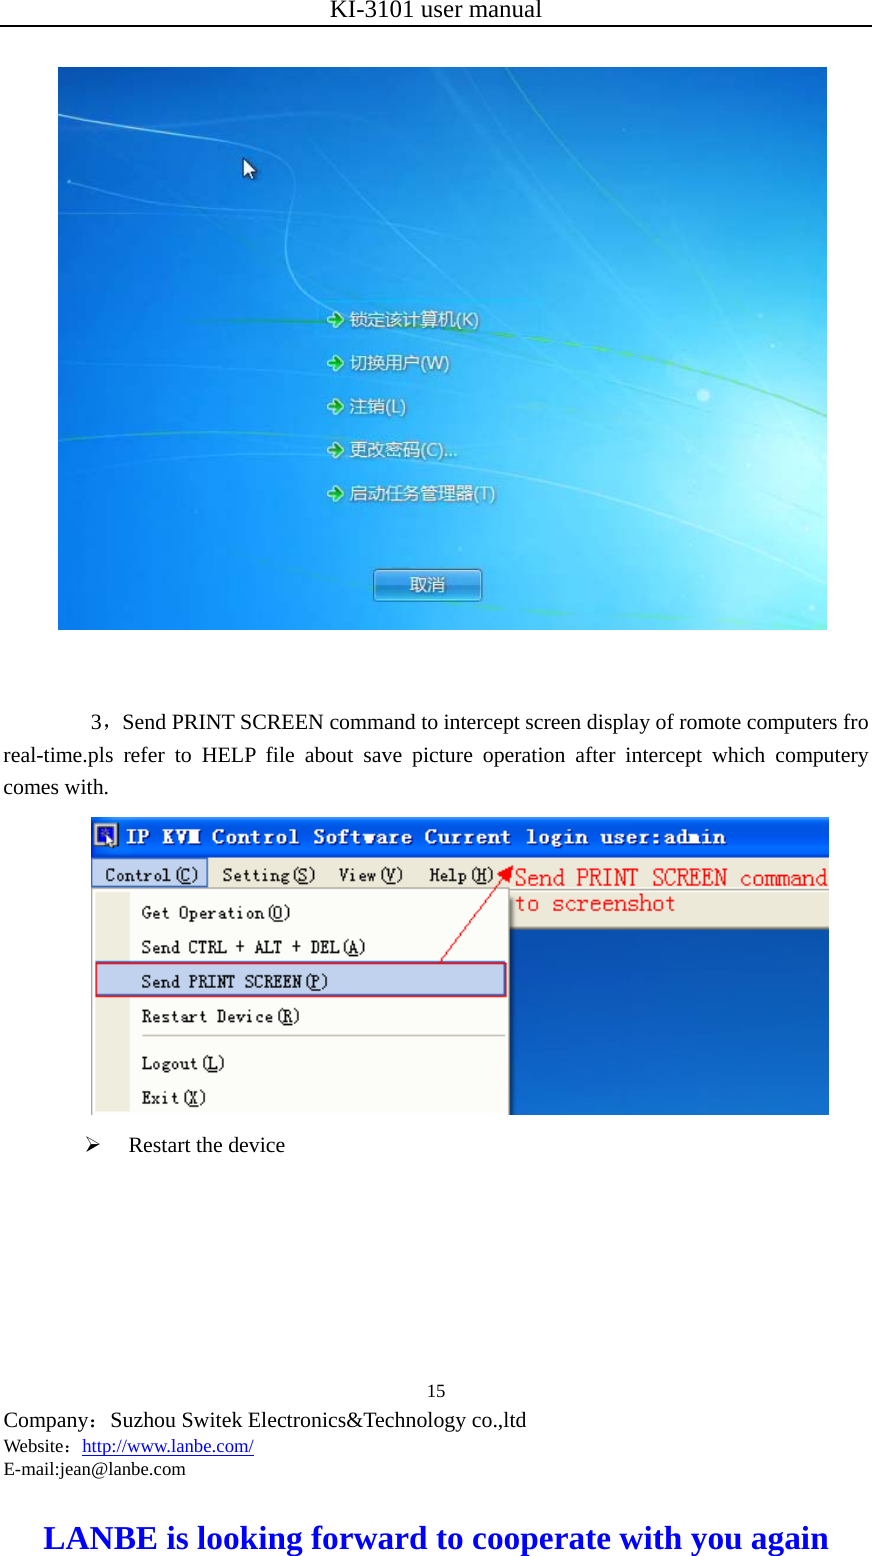 KI-3101 user manual  Company：Suzhou Switek Electronics&amp;Technology co.,ltd Website：http://www.lanbe.com/ E-mail:jean@lanbe.com   LANBE is looking forward to cooperate with you again 15                 3，Send PRINT SCREEN command to intercept screen display of romote computers fro real-time.pls refer to HELP file about save picture operation after intercept which computery comes with.   Restart the device 